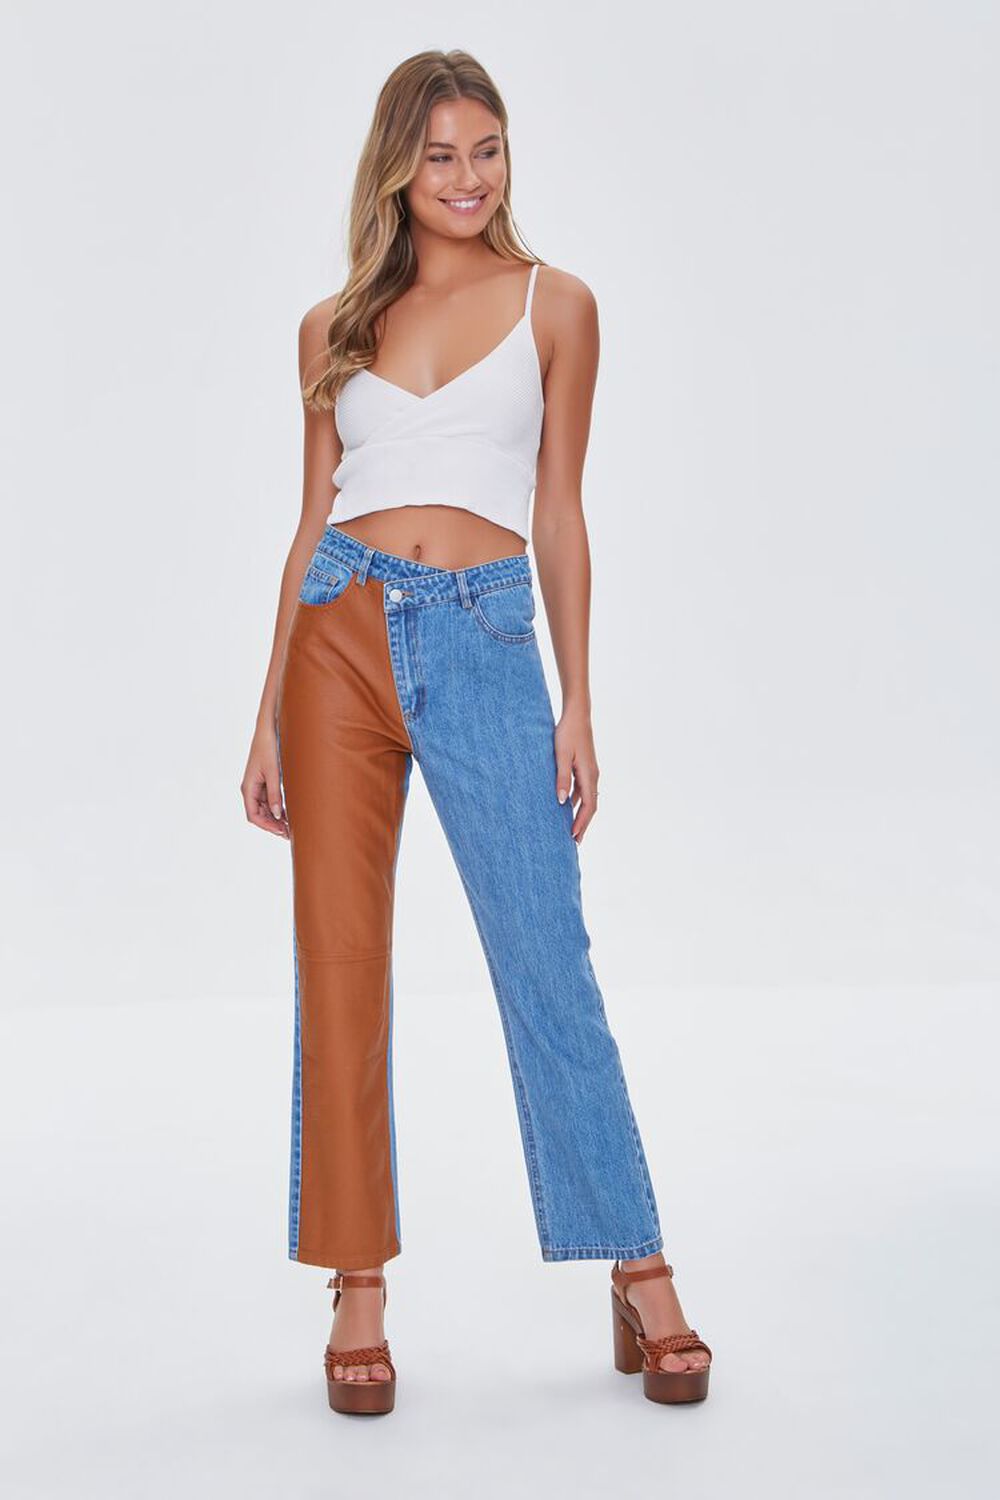 DENIM/CAMEL Reworked Faux Leather Jeans, image 1